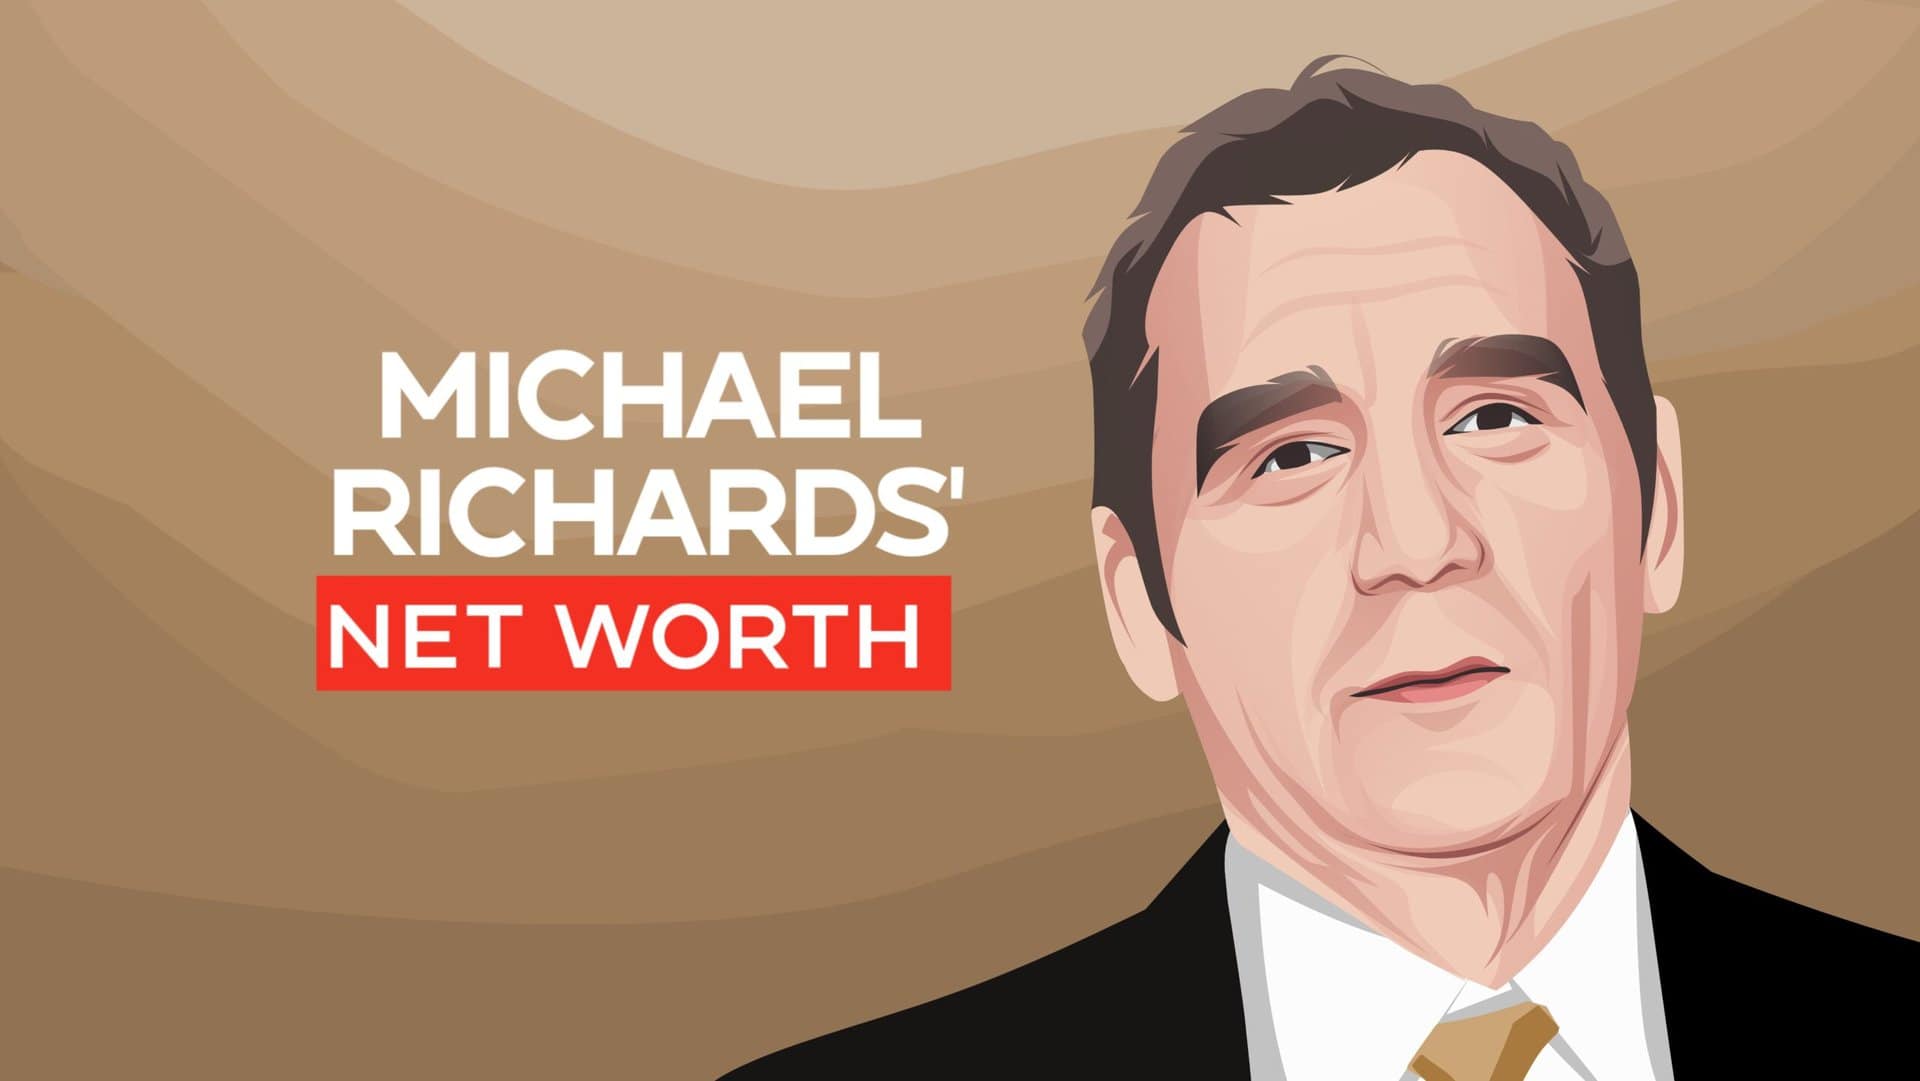 Michael Richards Net Worth A Look at the Seinfeld Icon's Finances and